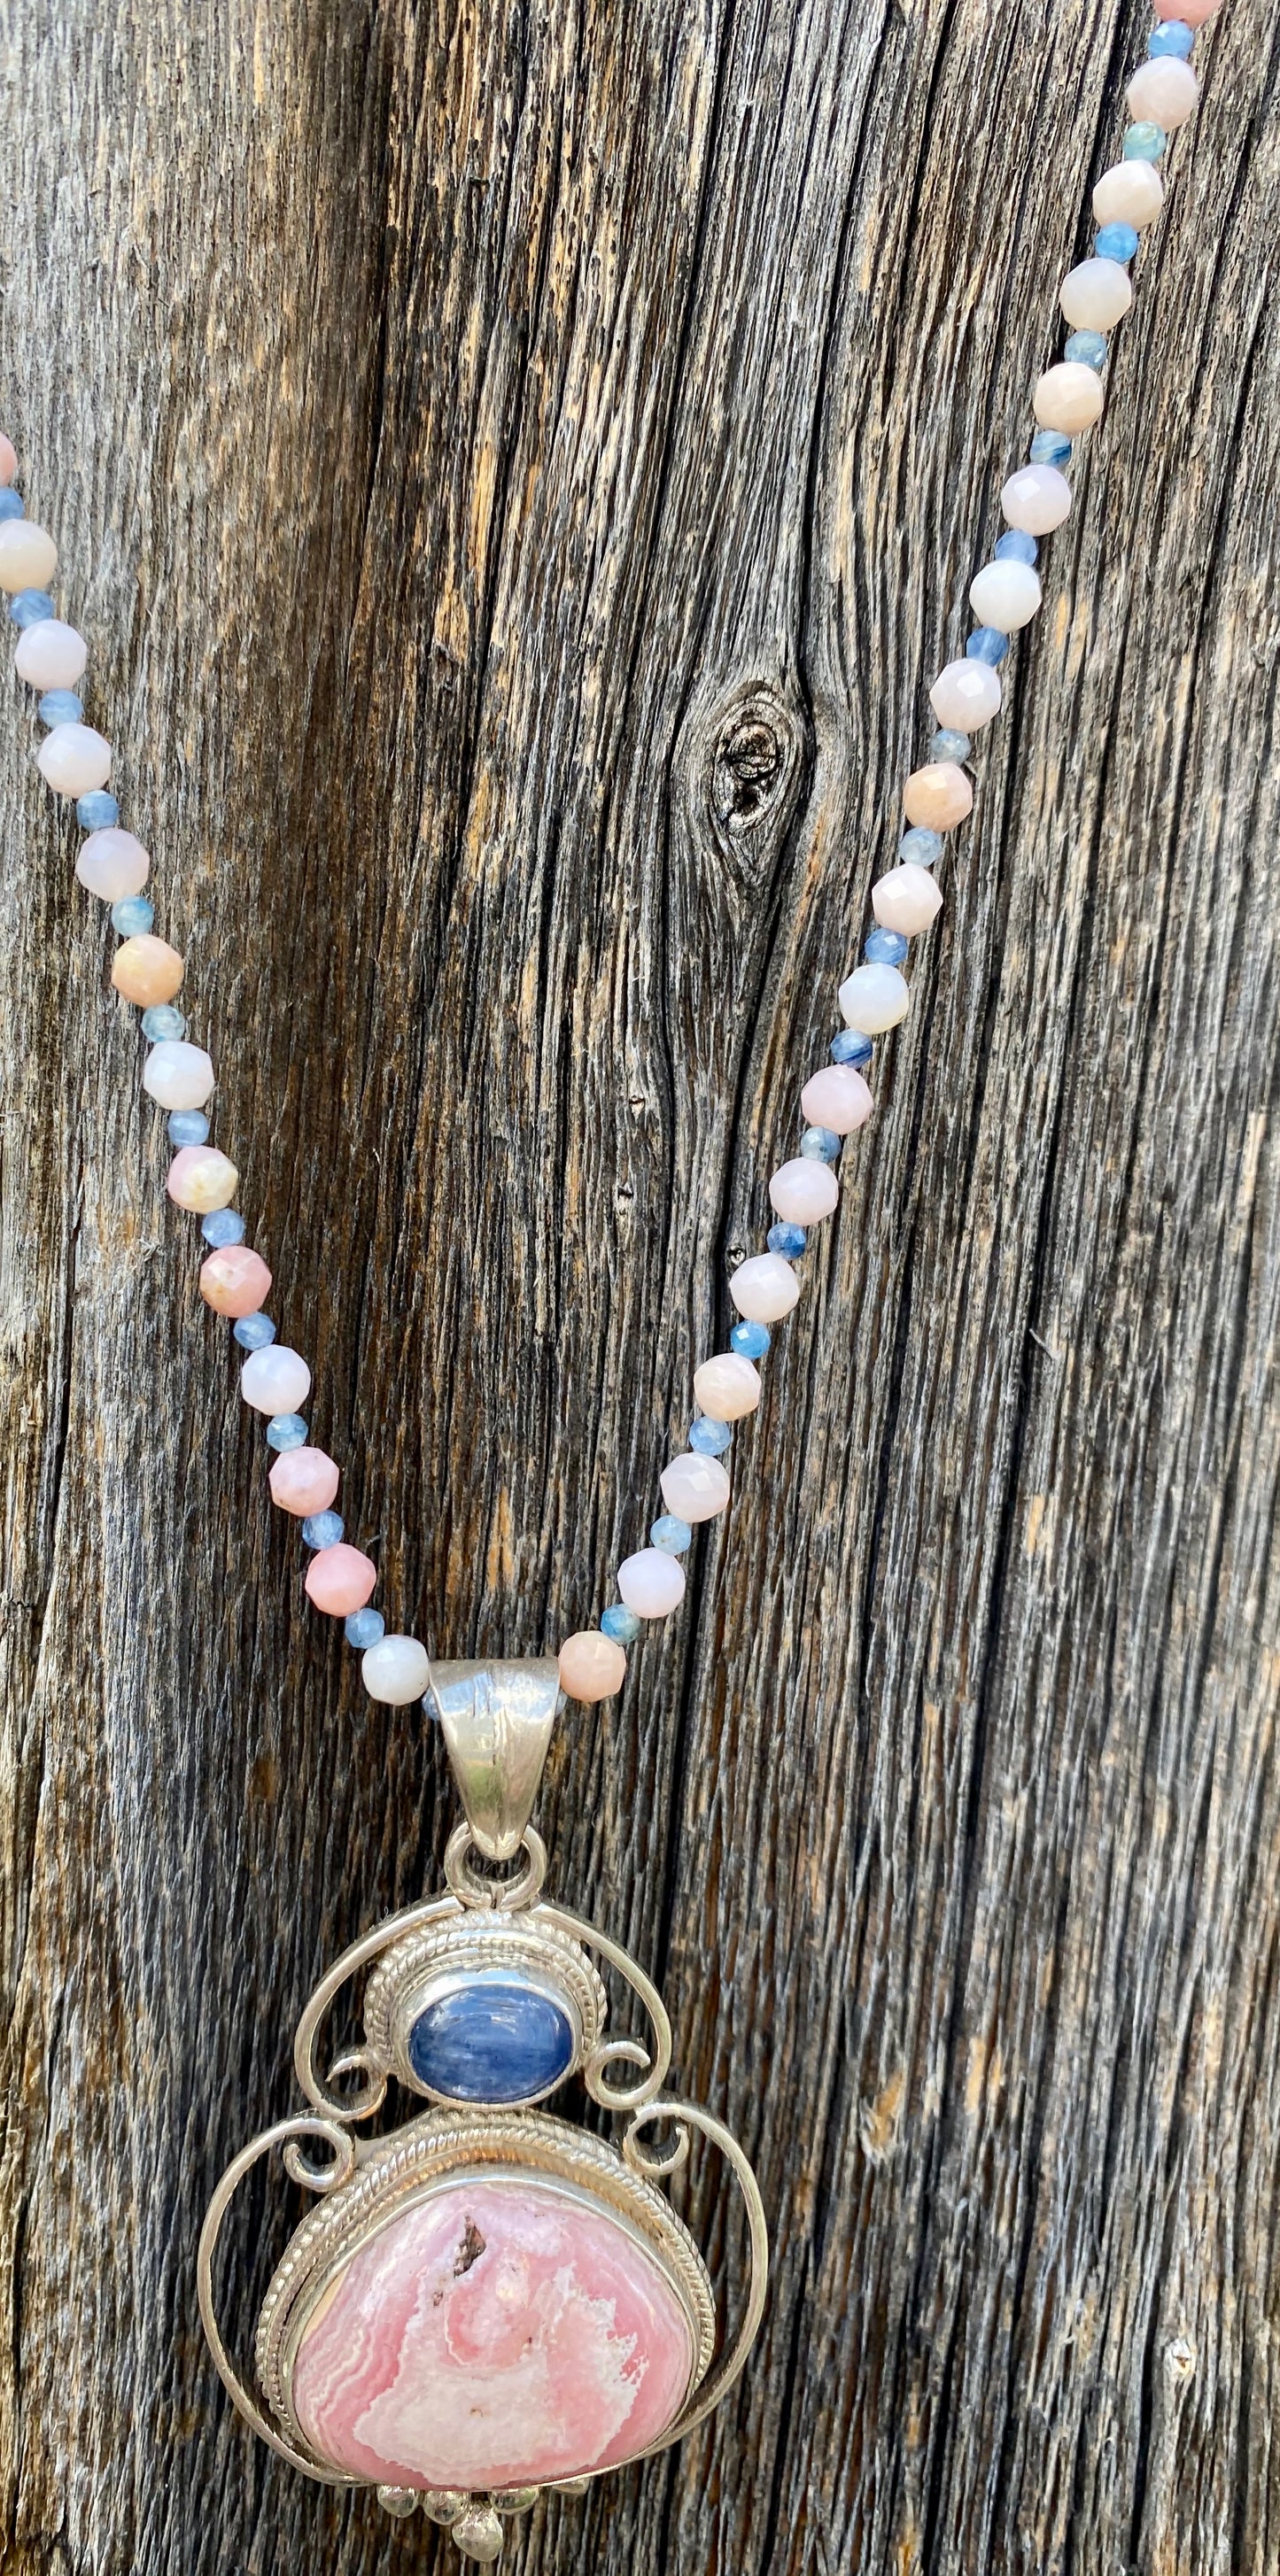 Pink Opal and Kyanite Necklace with Rhodochrosite and Kyanite Pendant